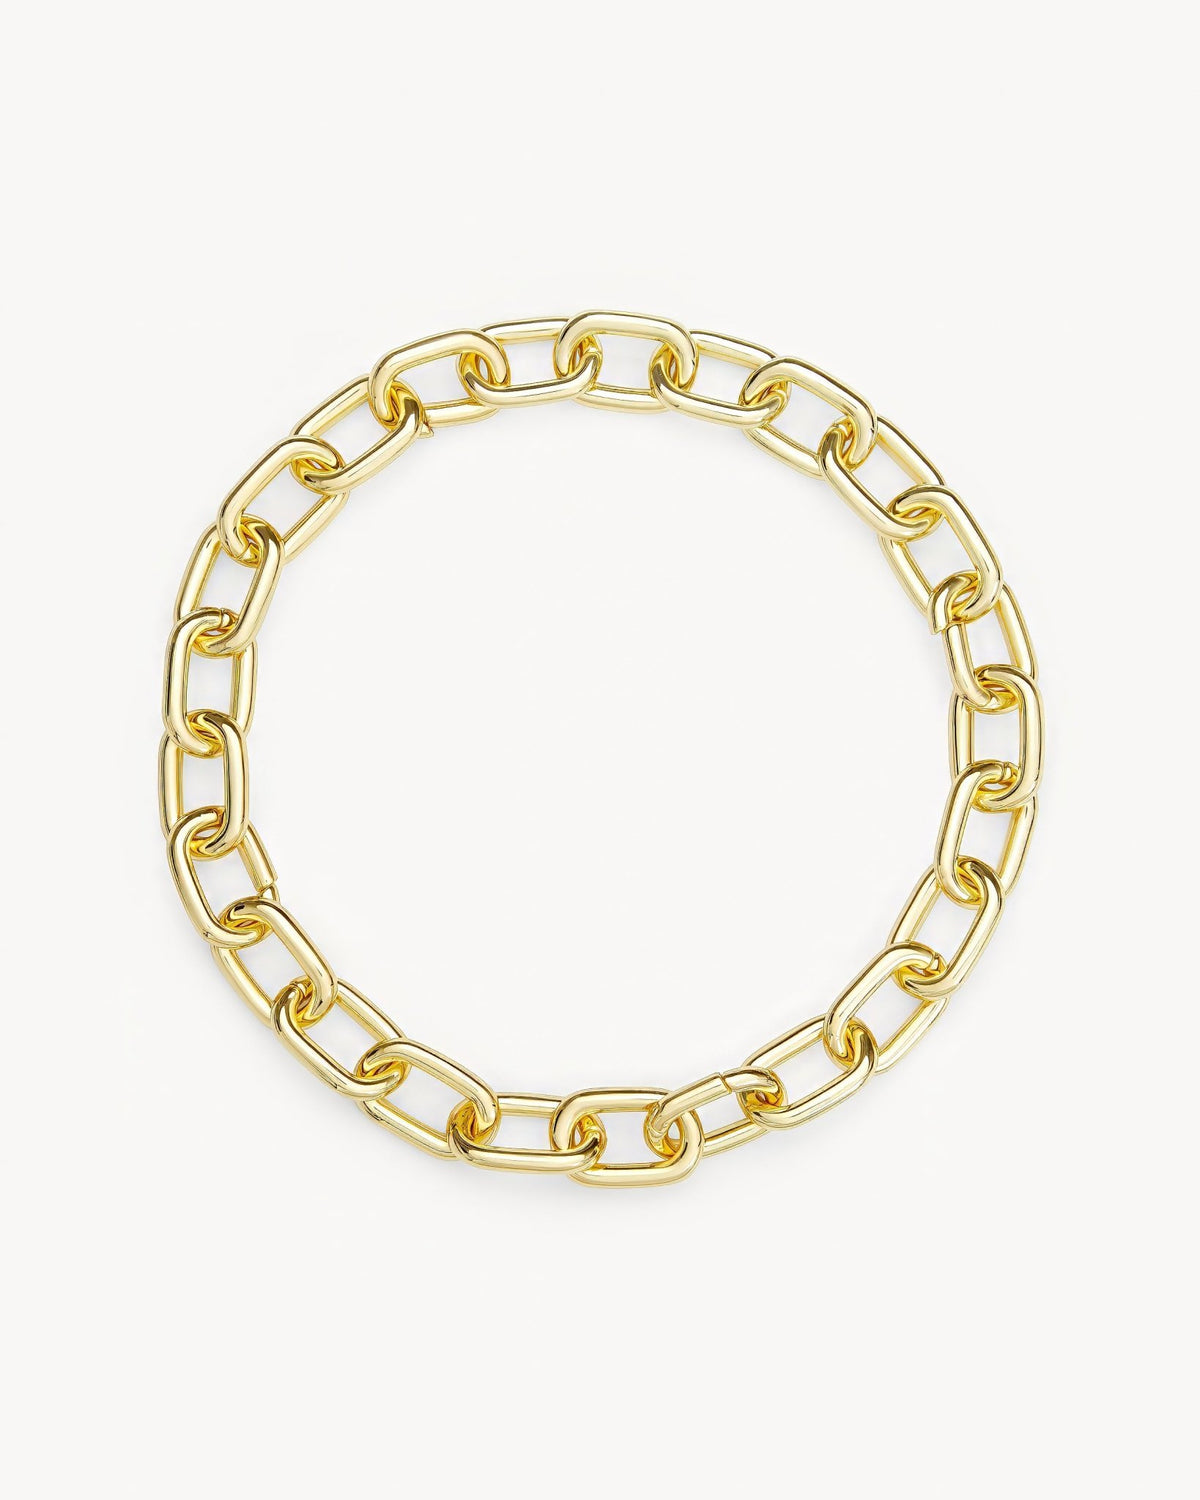 Interchangeable Link Necklace in 14k Gold